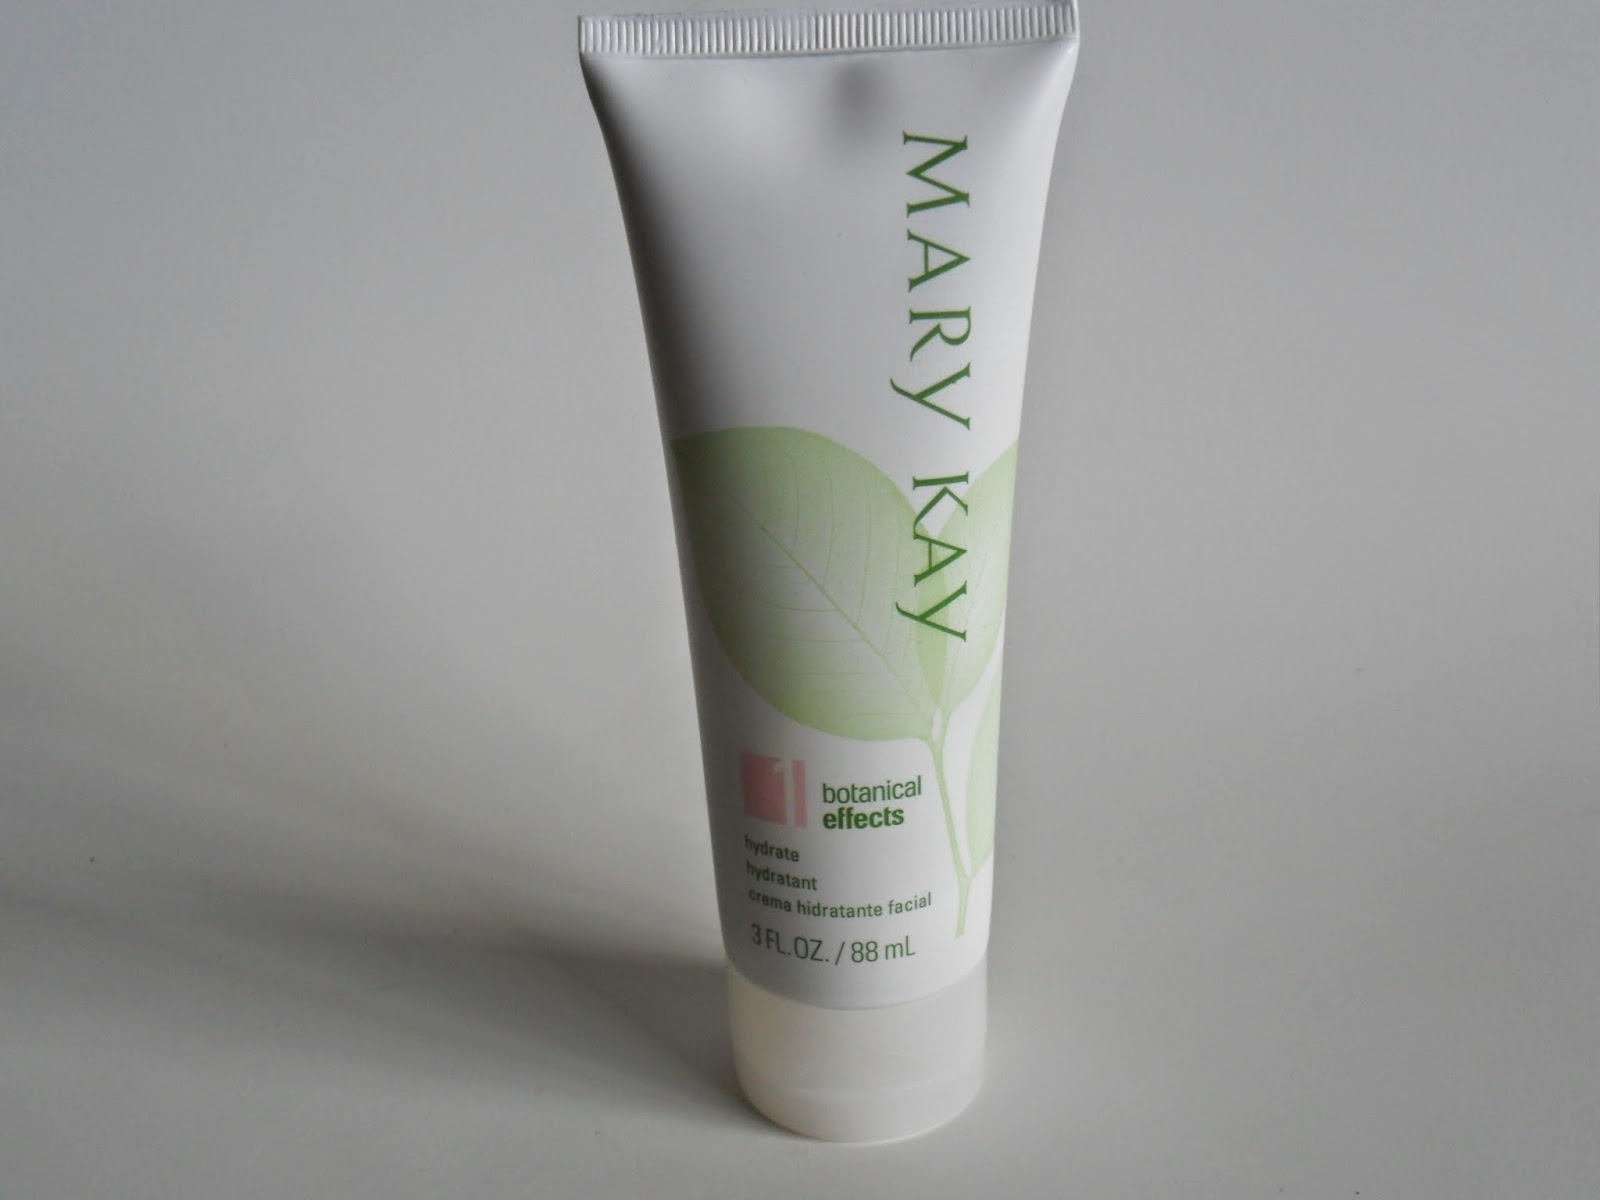 Back to nature with Botanical Effect form Mary Kay. Review